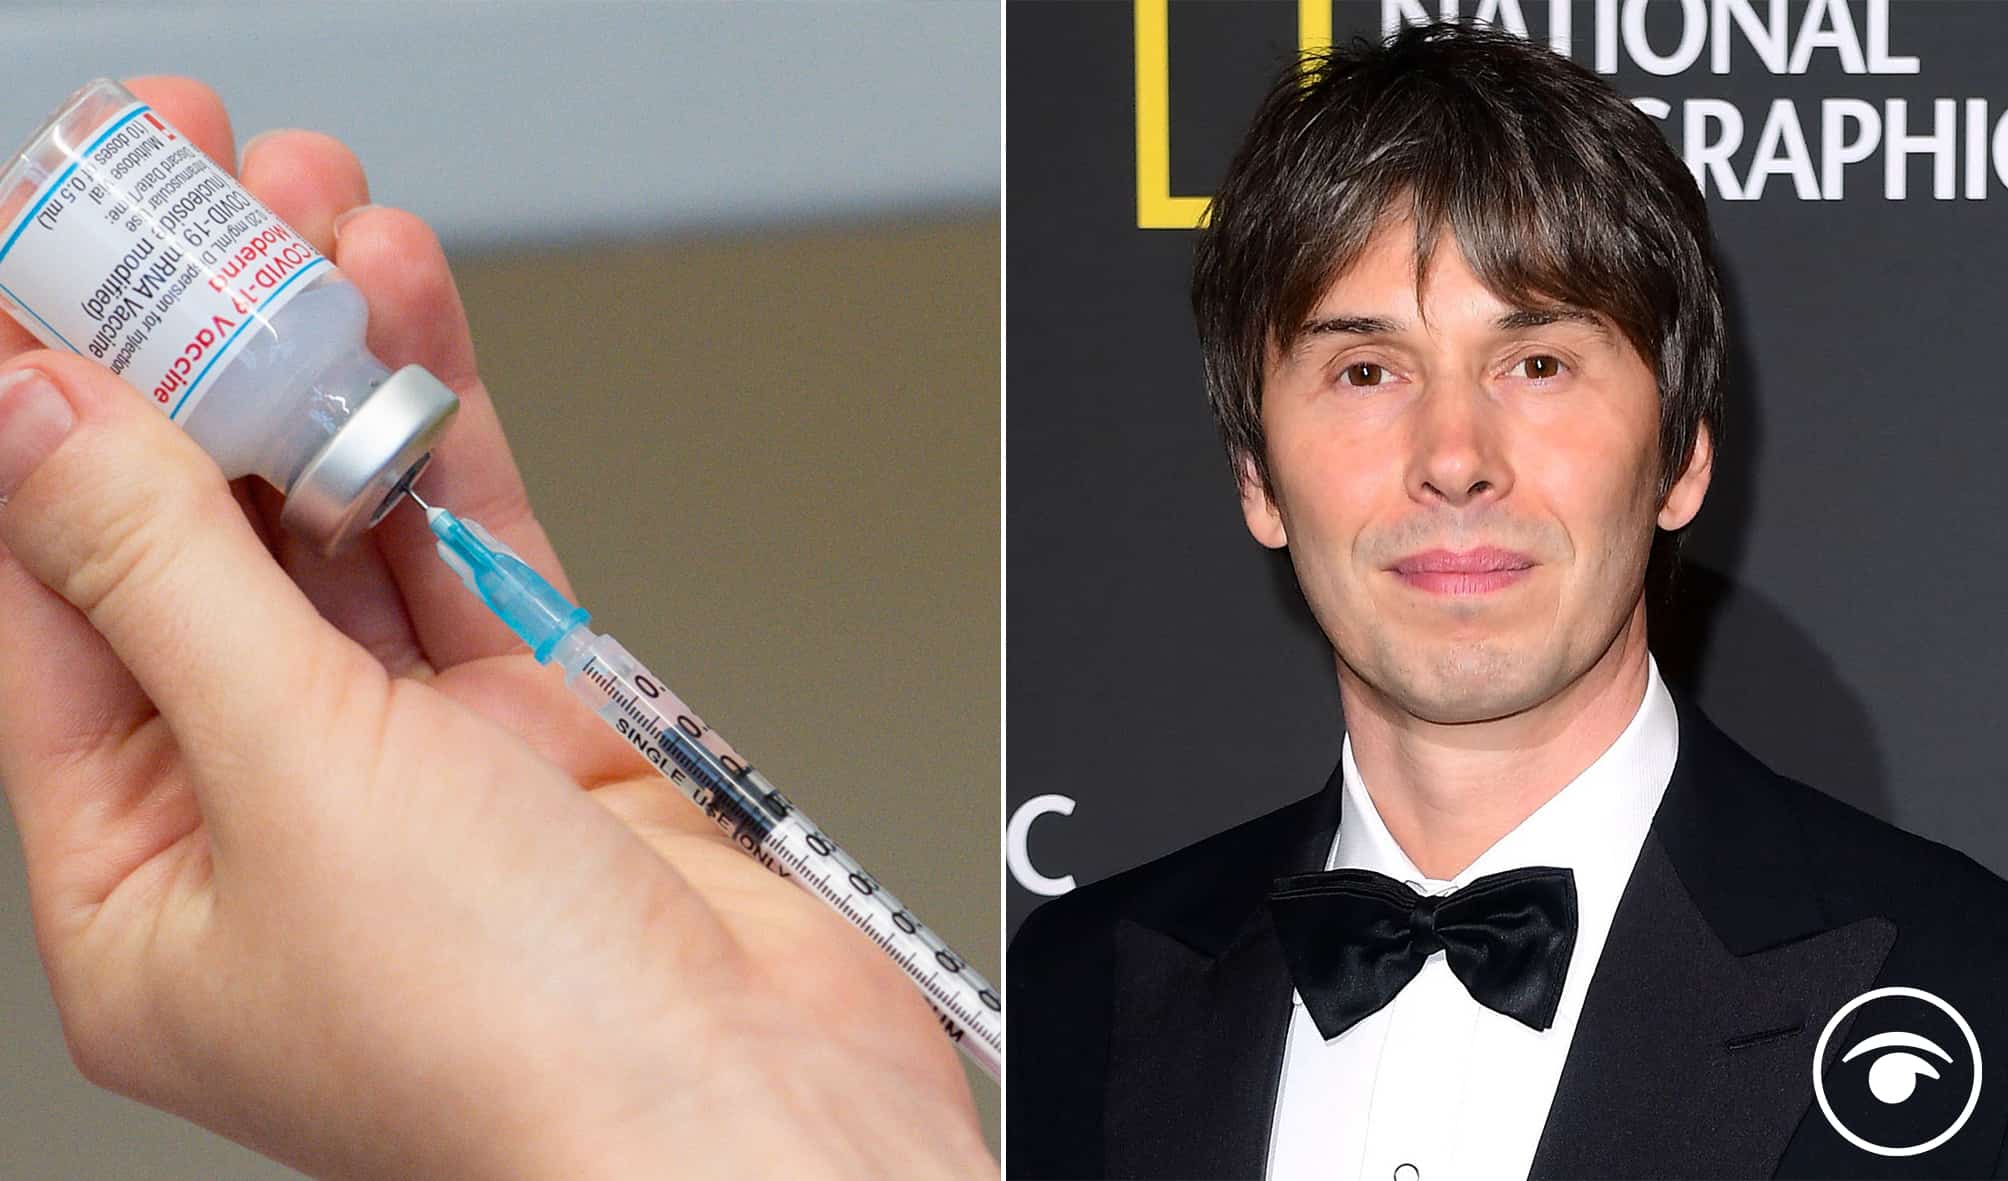 Prof Brian Cox’s epic response to a debunked Covid conspiracy theory is something else